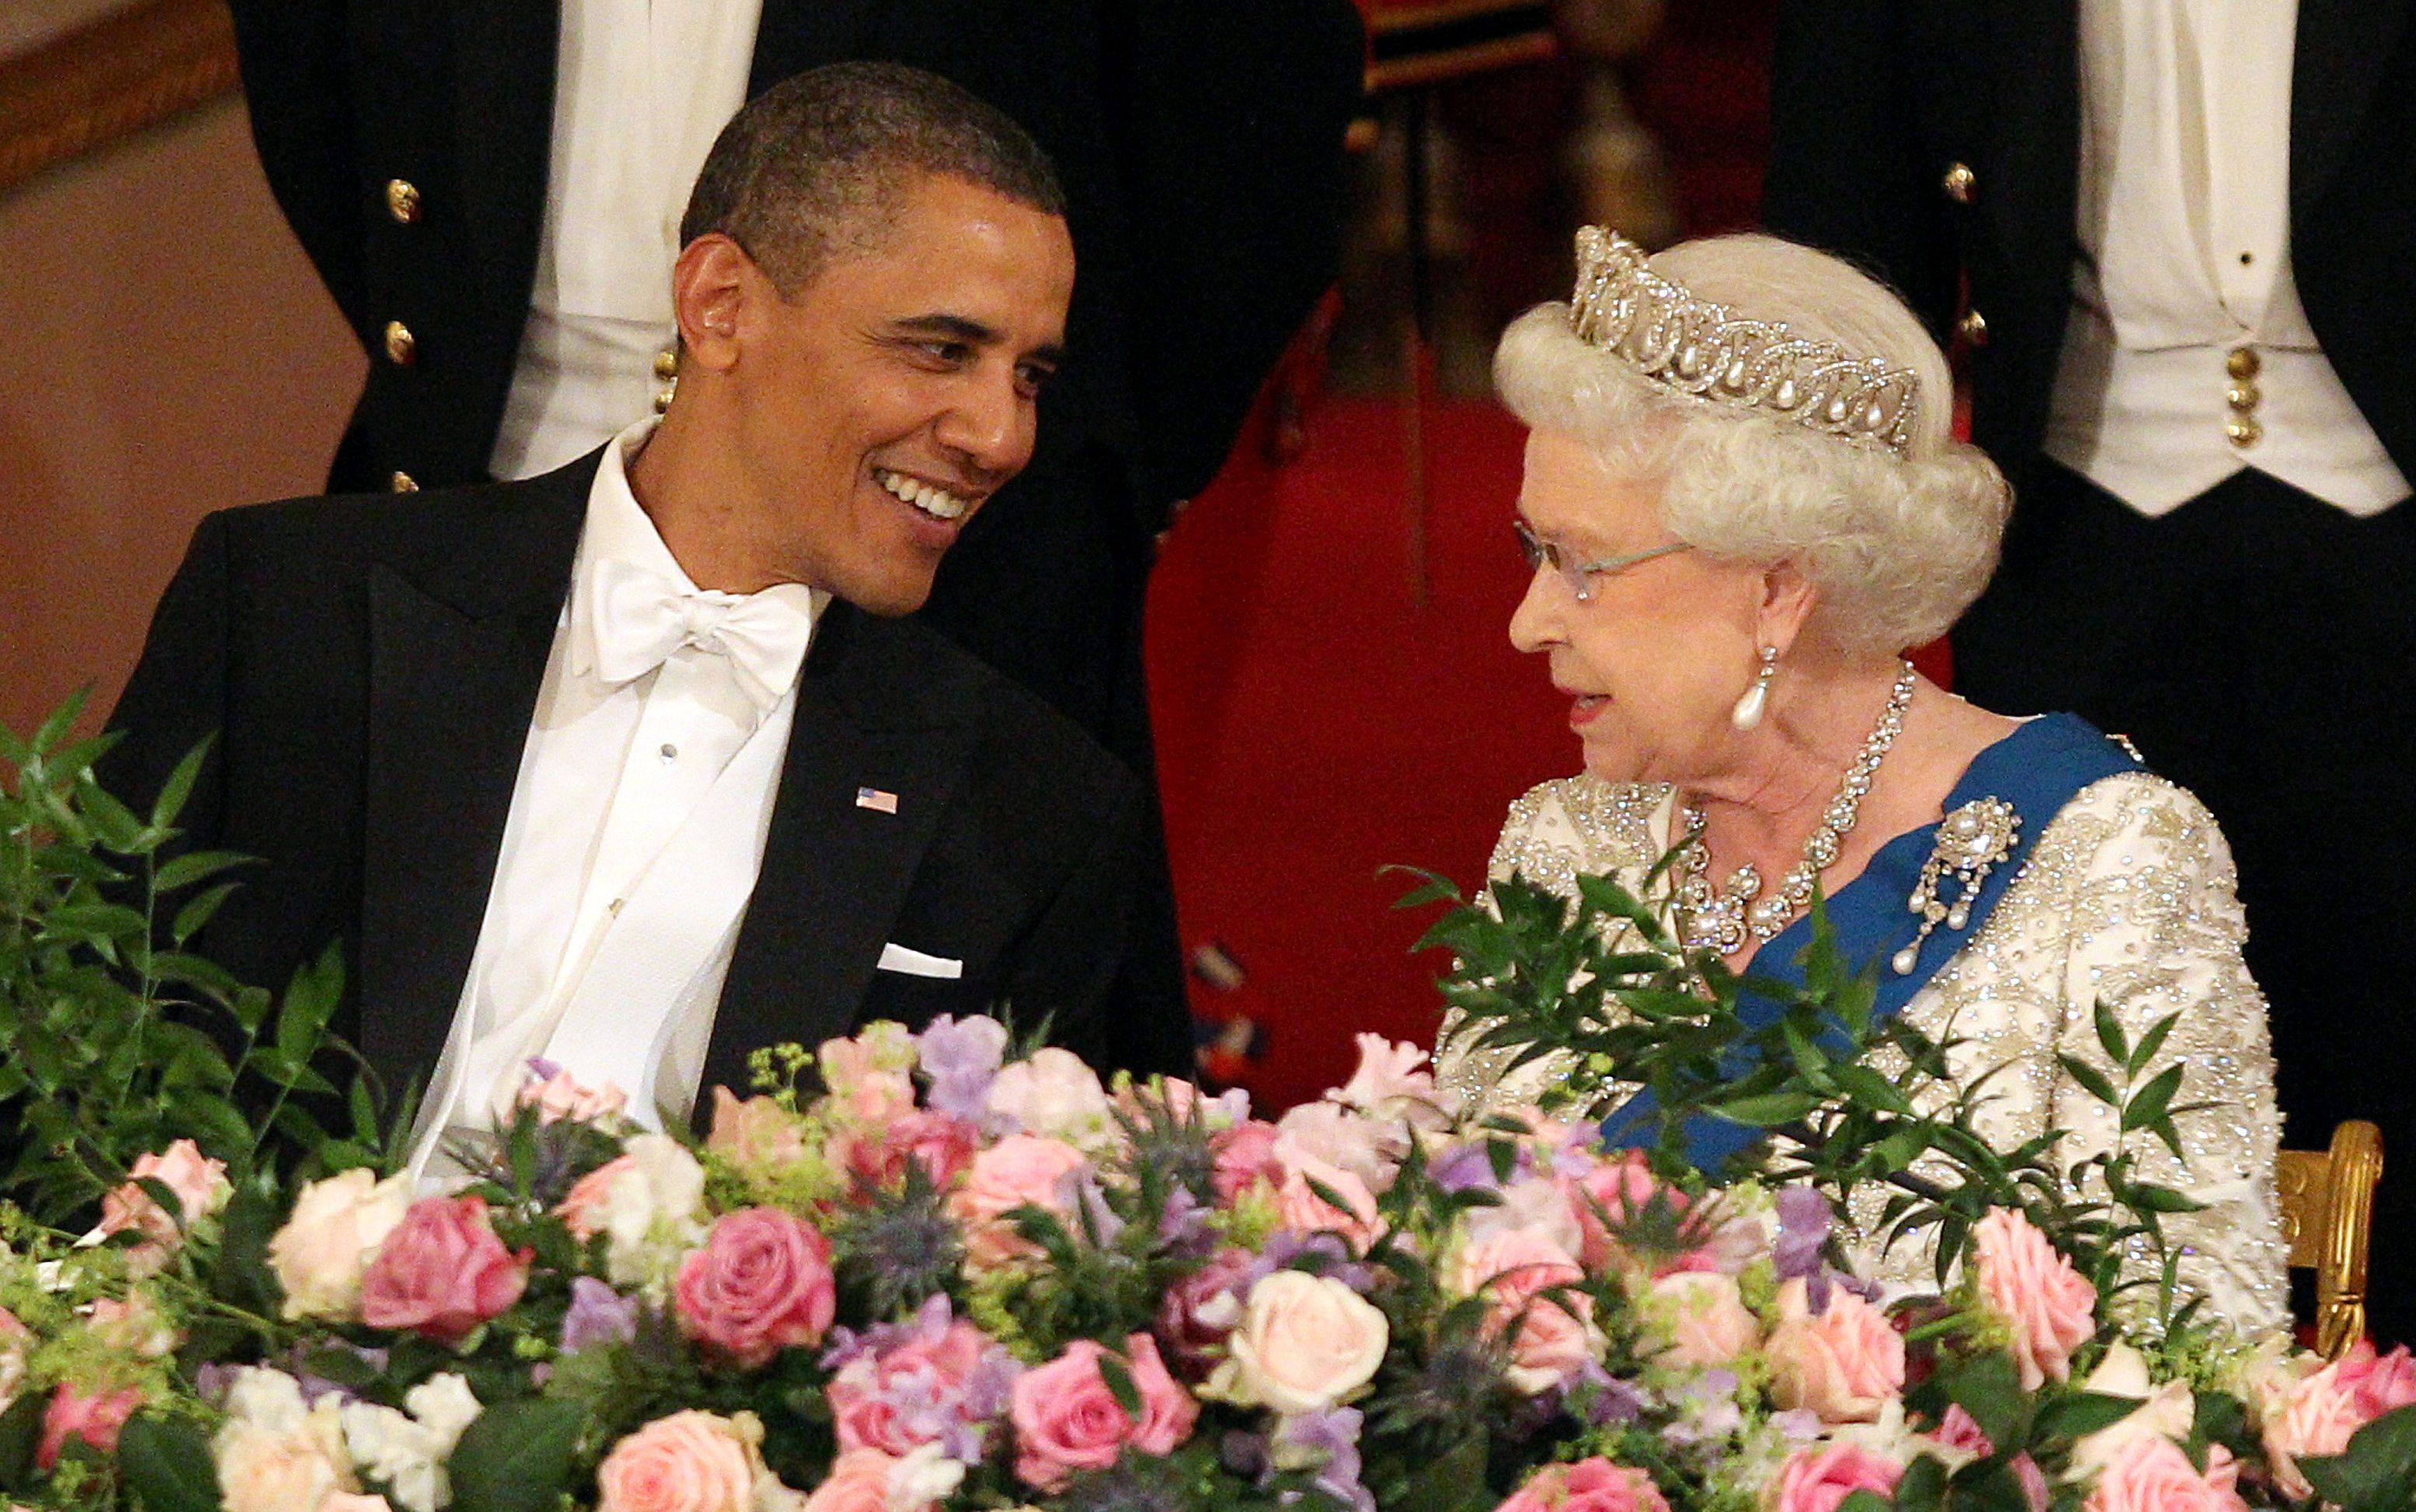 (FILES) In this file photo taken on May 24, 2011 US President Barack Obama speaks with Britain’s Queen Elizabeth II during a state banquet at Buckingham Palace, in central London. - From a string of US presidents to Lady Gaga, Queen Elizabeth II met leading political and artistic personalities from around the globe during her record-breaking time on the throne. Some were despised dictators, others world-famous guitarists she made polite conversation with. Regardless of the personalities, she always kept her composure. (Photo by LEWIS WHYLD / POOL / AFP)